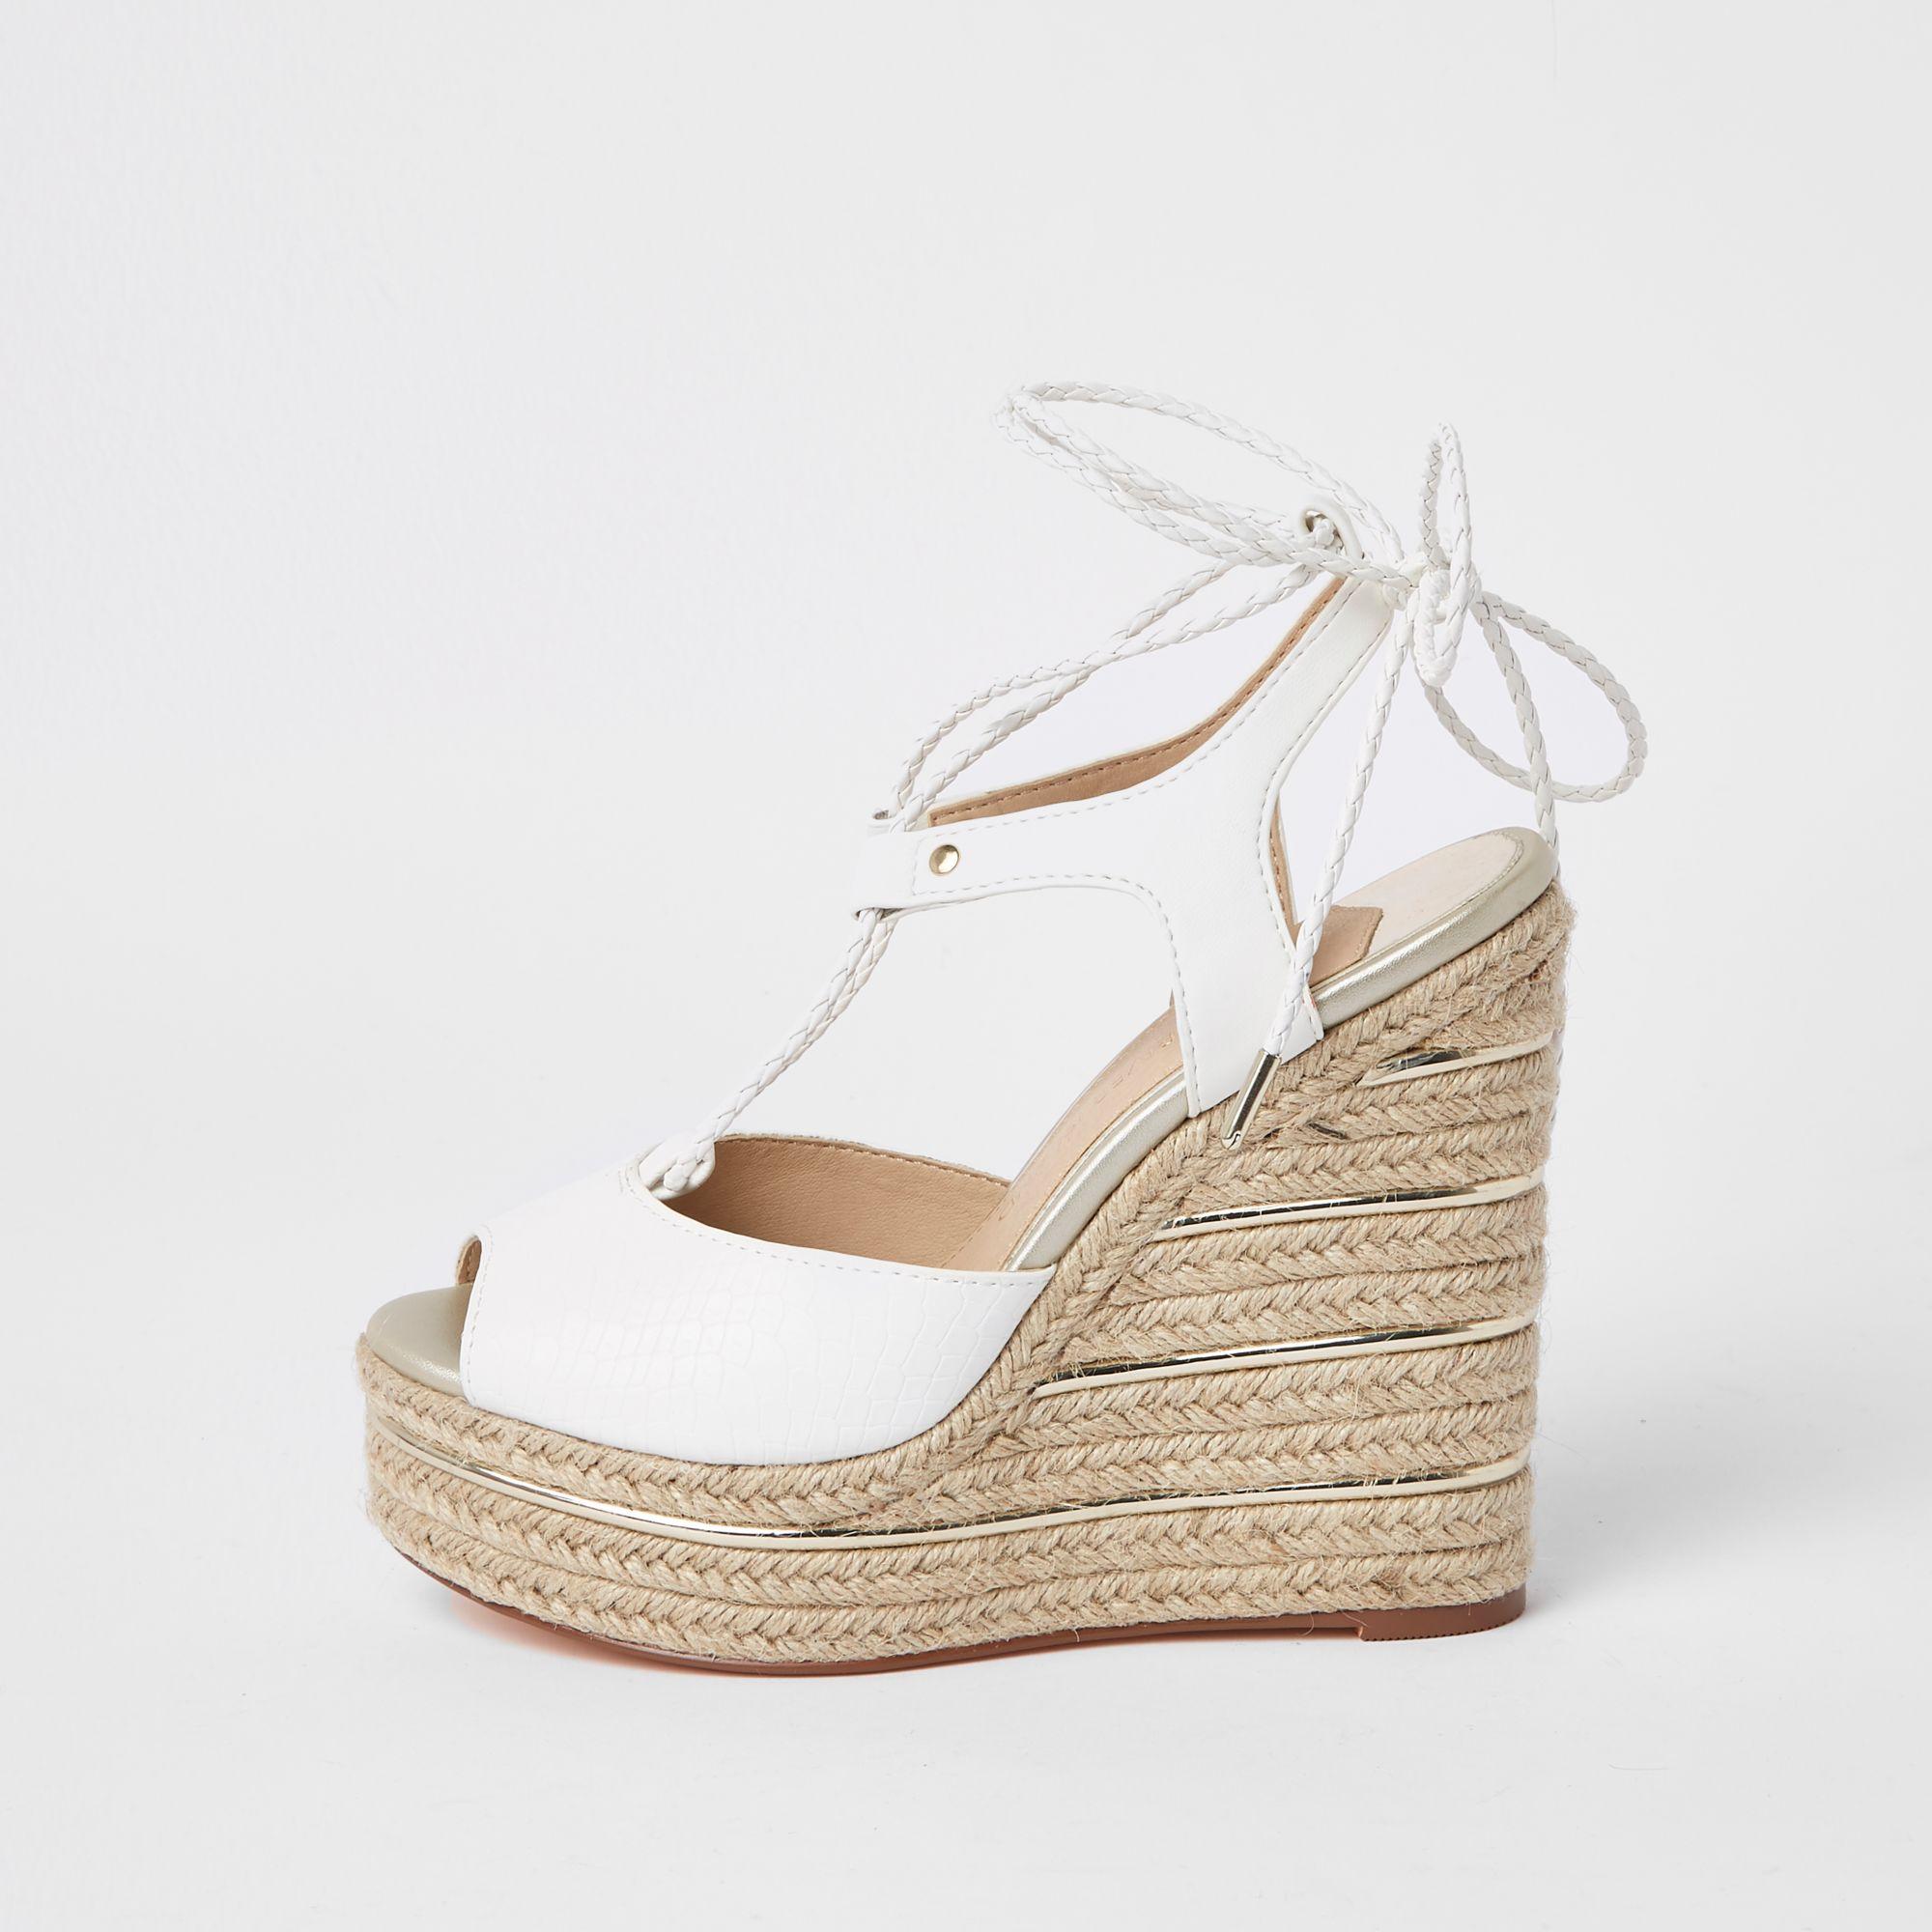 River Island Tie Up Espadrille Wedges in White - Lyst